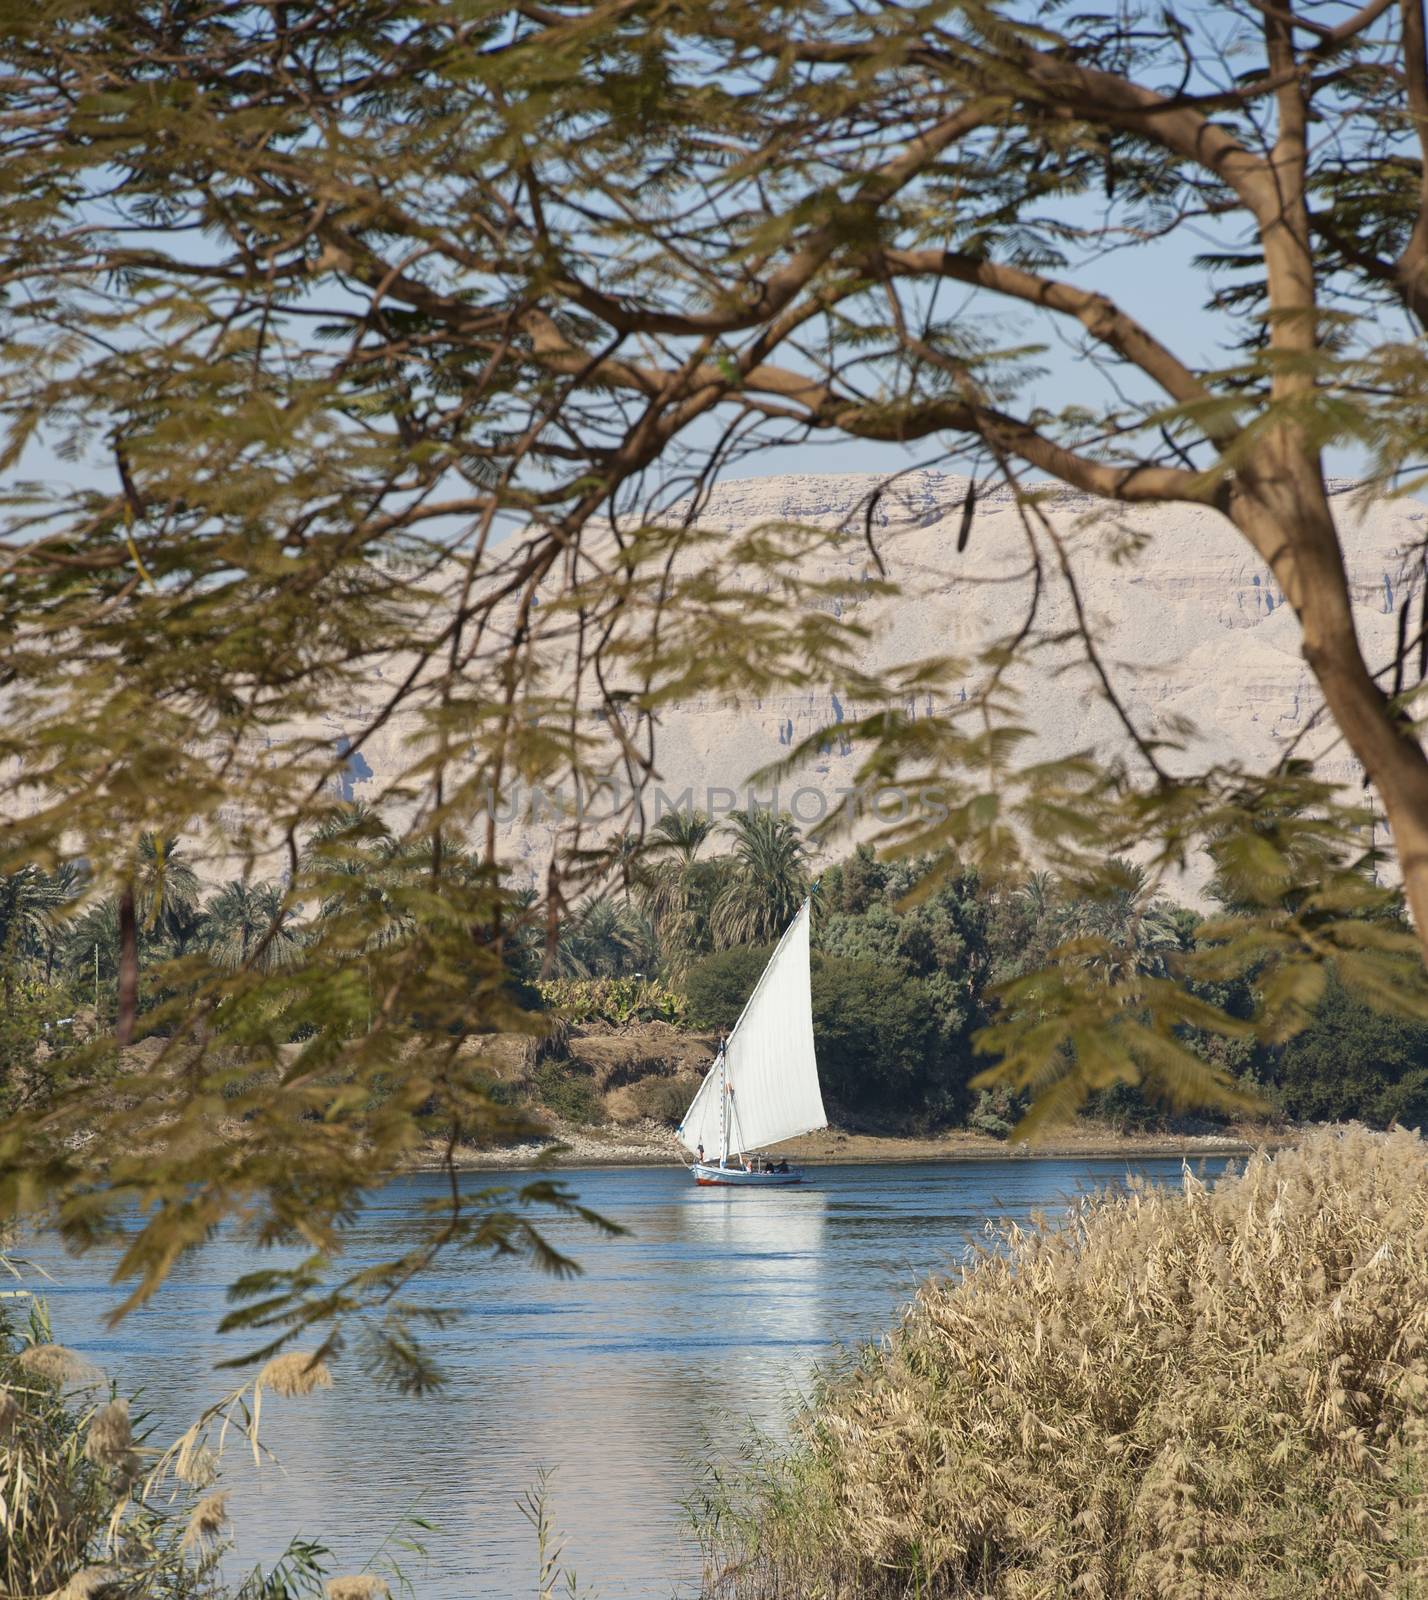 Traditional egyptian sailing felluca cruising on the River Nile framed by trees